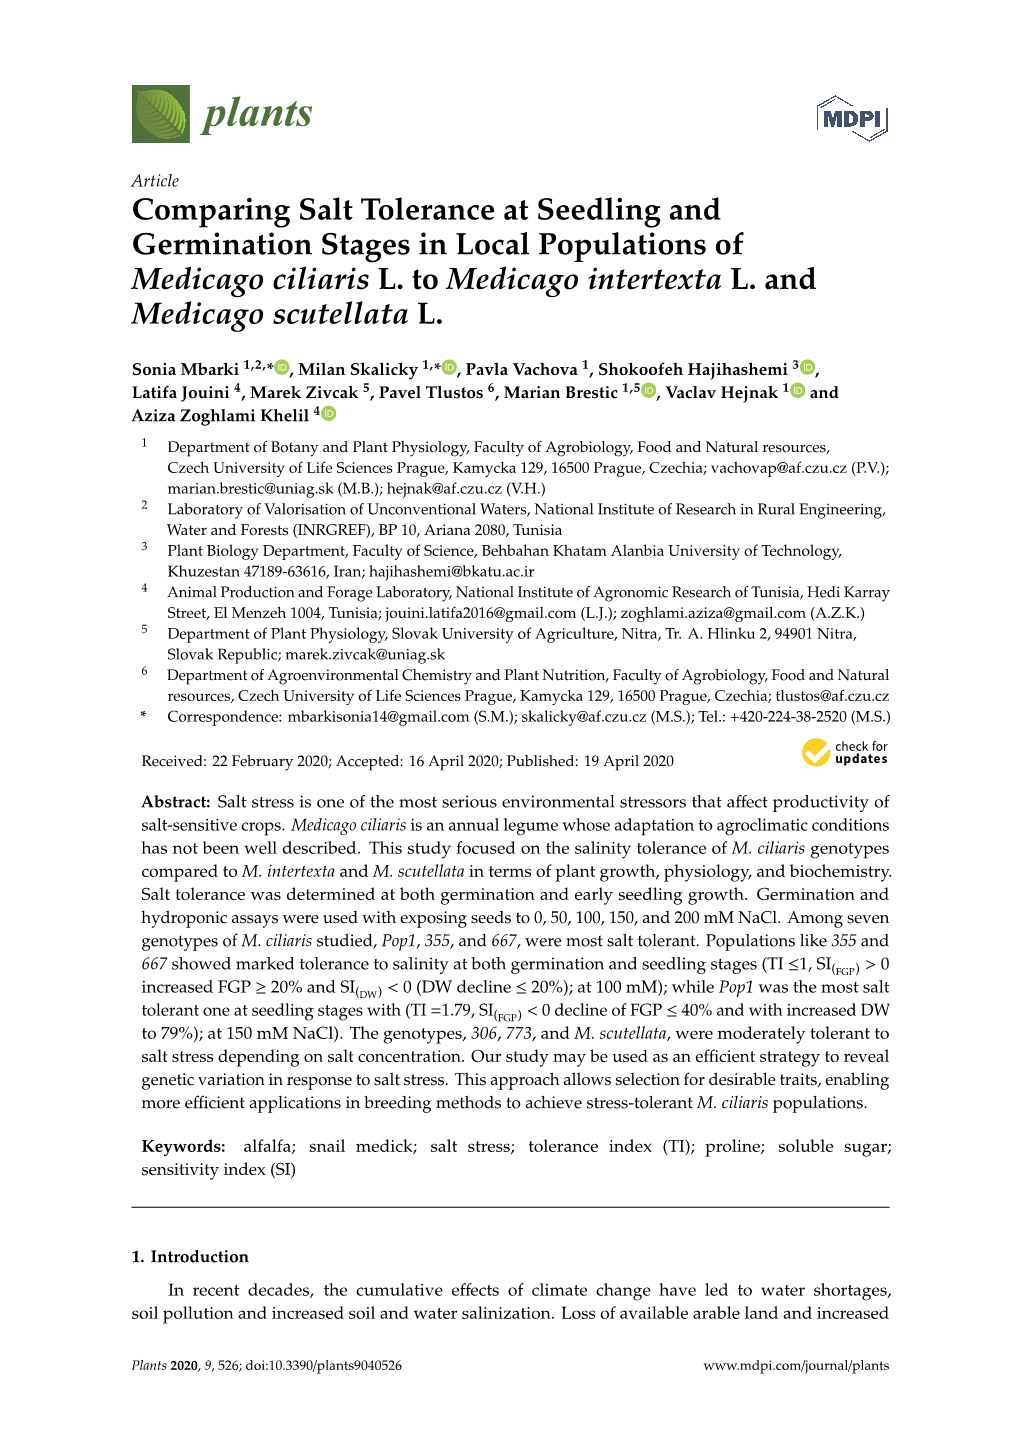 Comparing Salt Tolerance at Seedling and Germination Stages in Local Populations of Medicago Ciliaris L